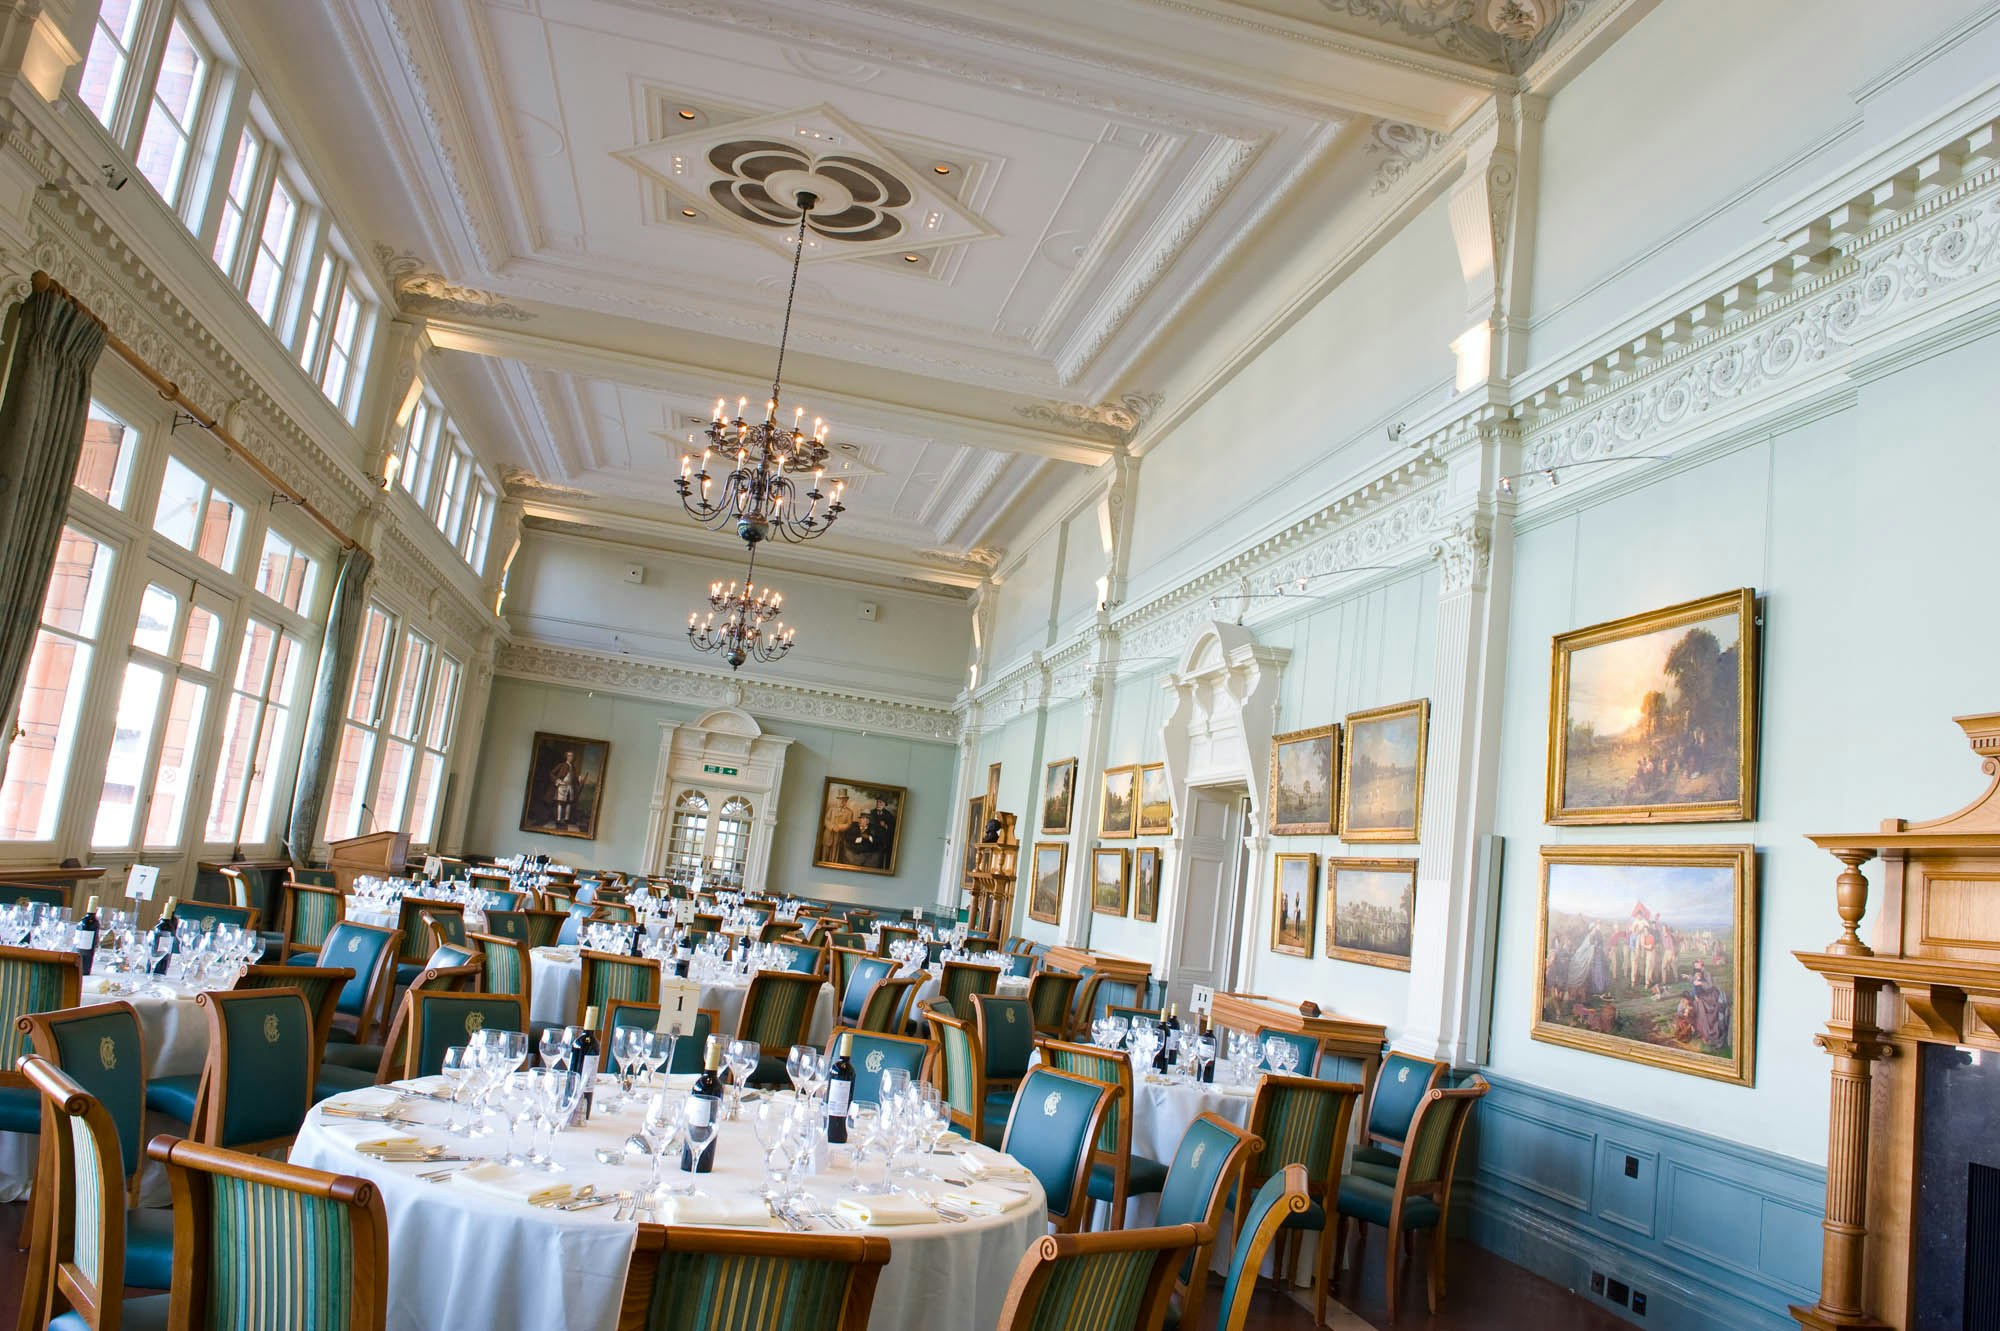 Away Day Activities in London - Lord's Cricket Ground - Events in Long Room - Banner